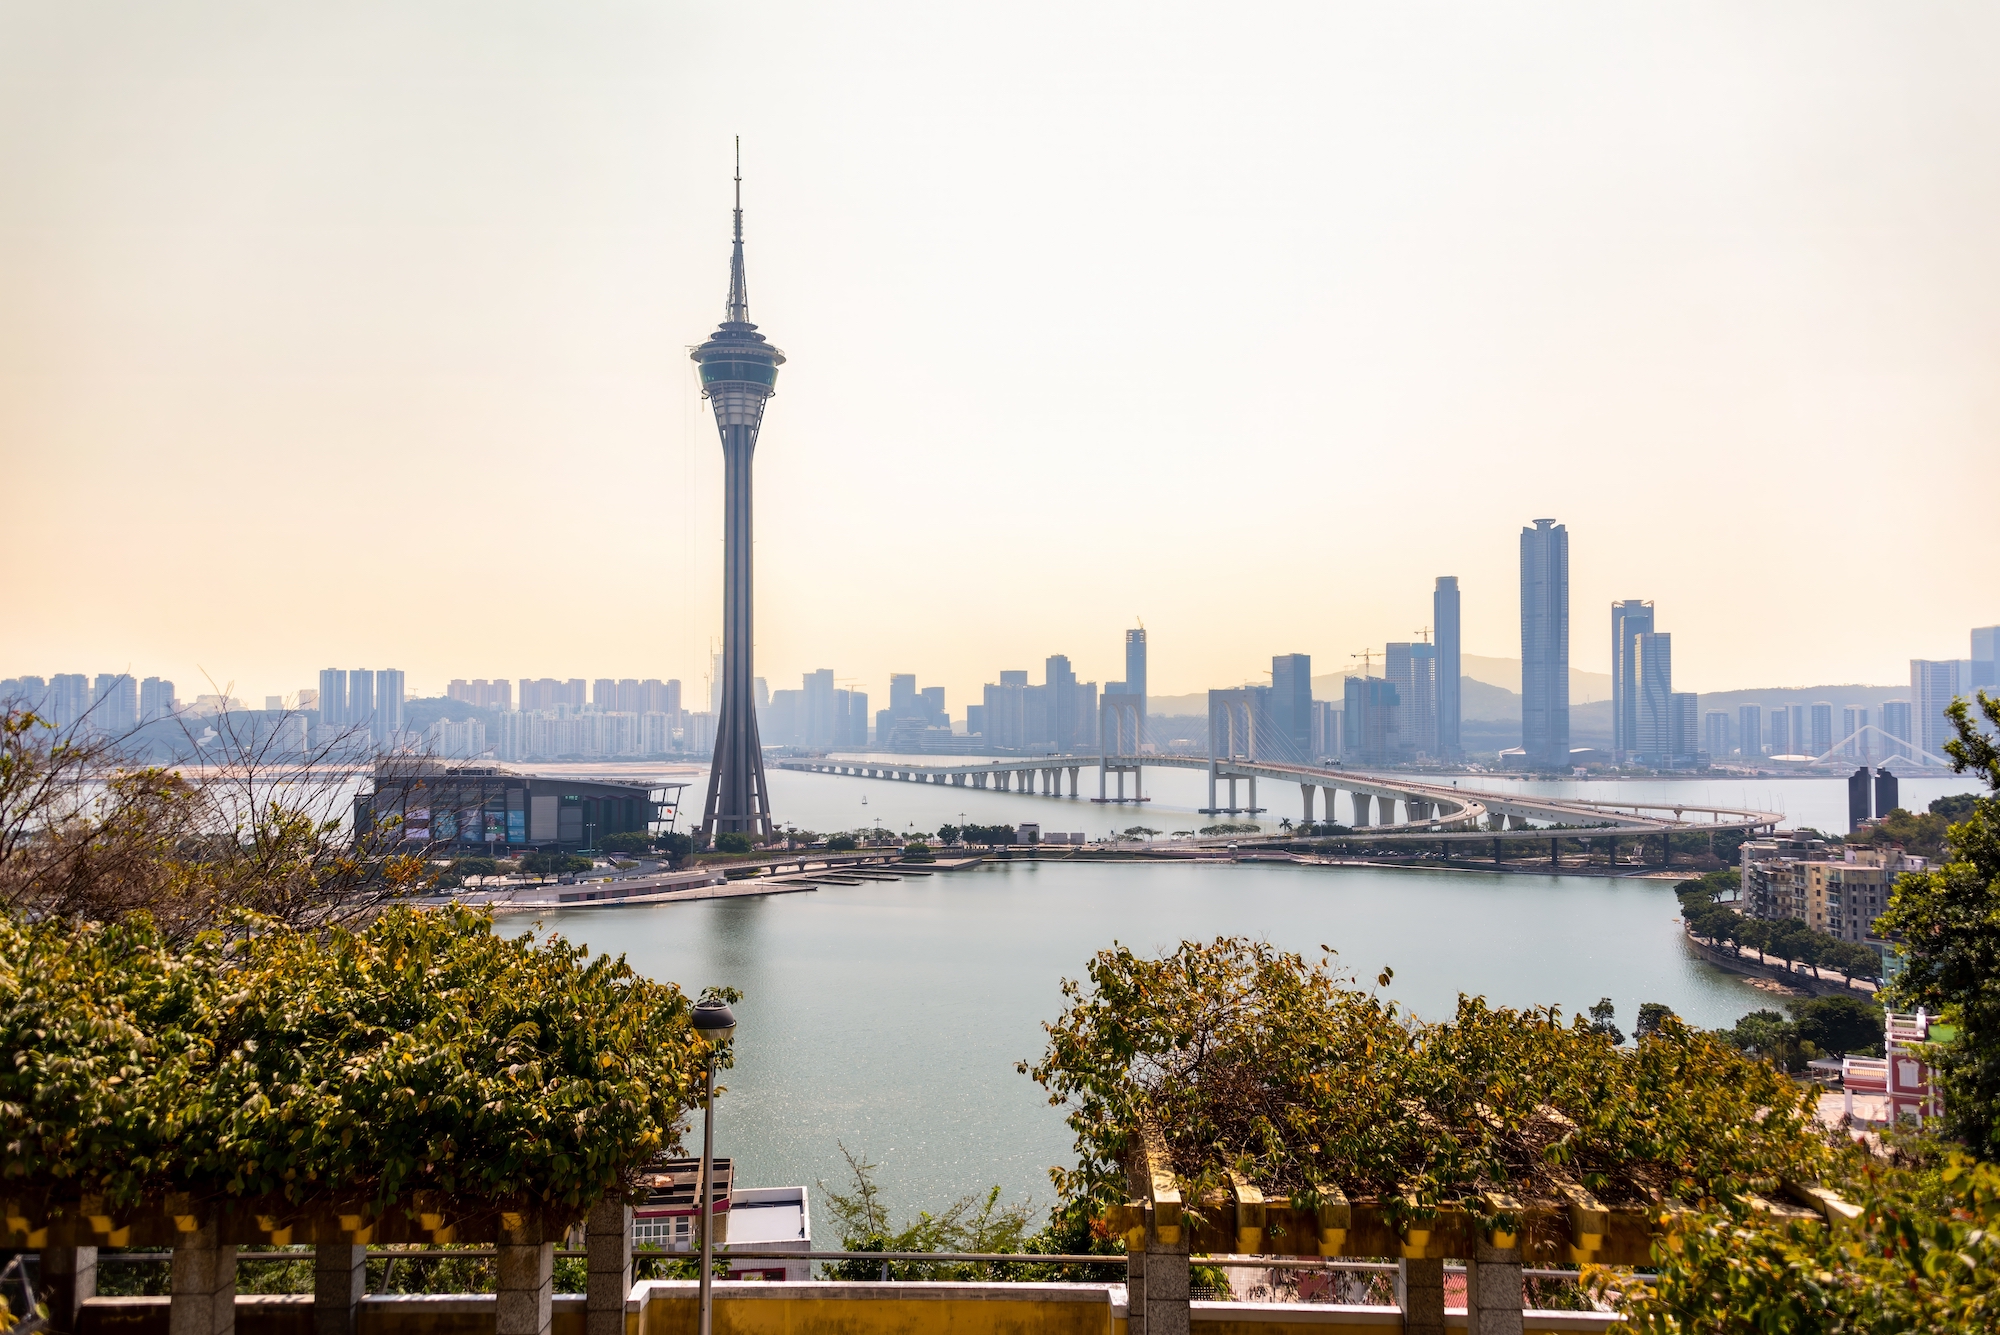 Macao’s sustainability conference is back with four days of talks and green exhibitions